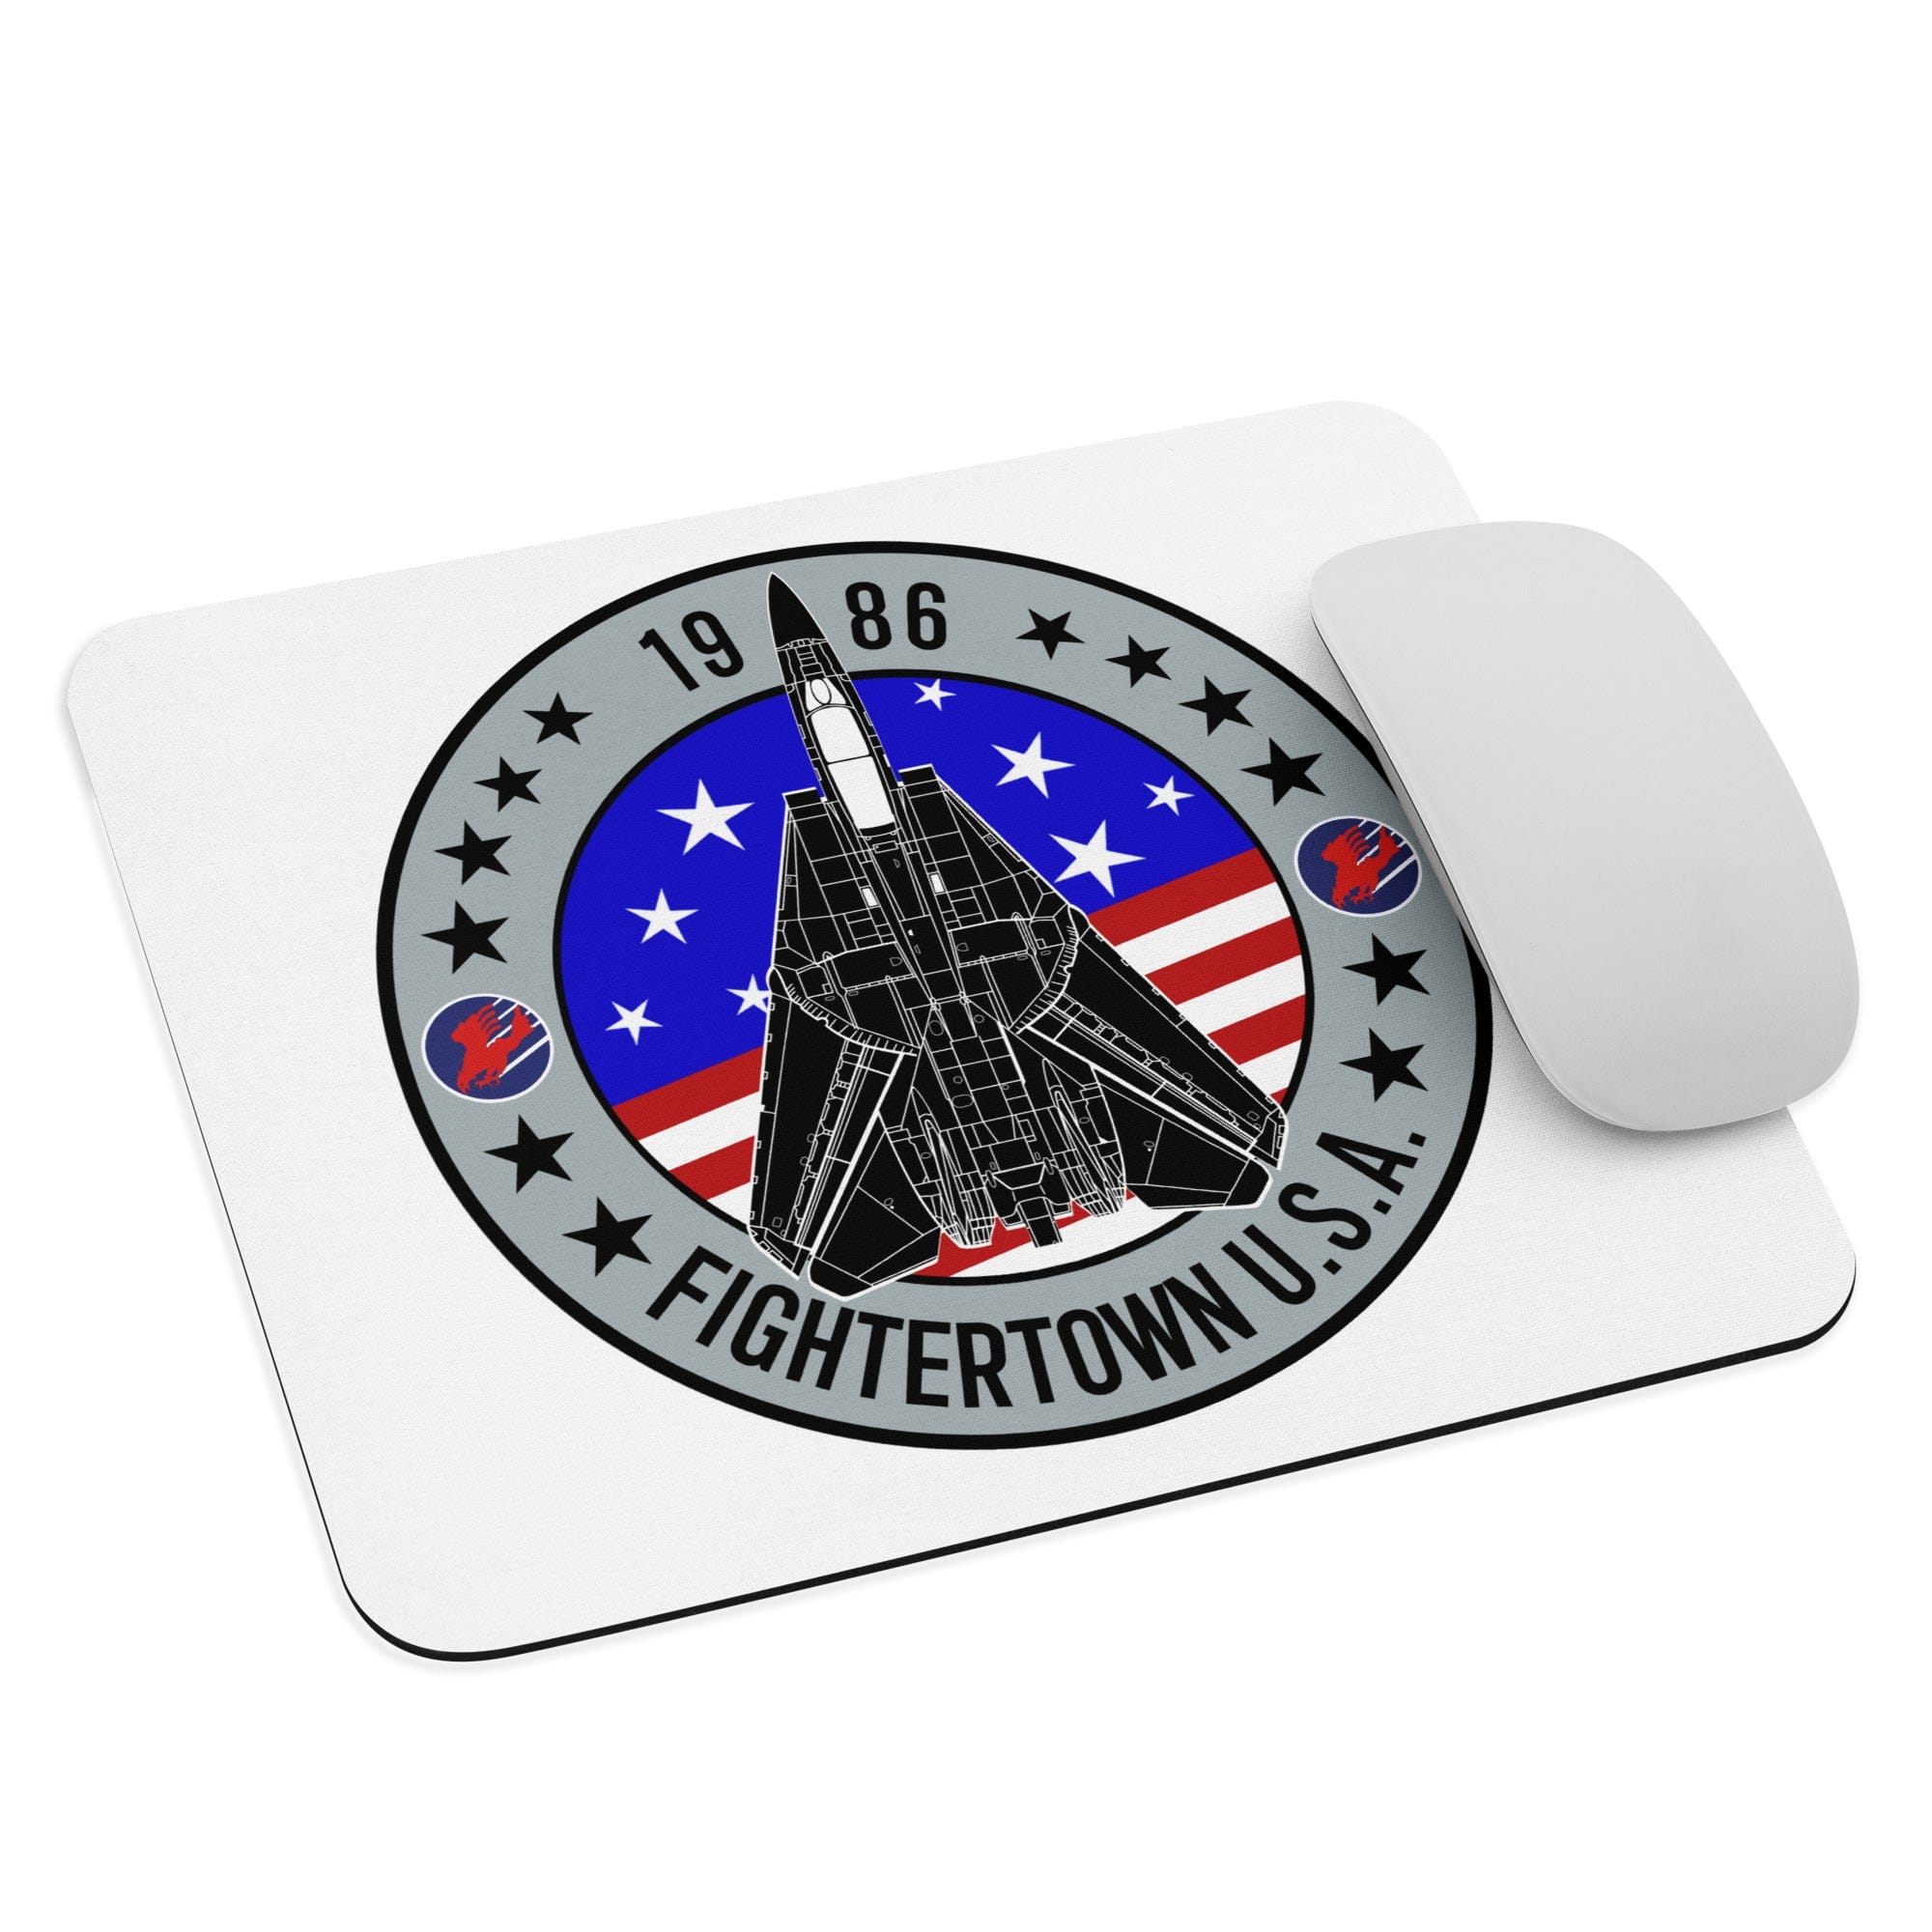 Top Gun Fans Mouse Pads F-14 Fightertown Mouse pad